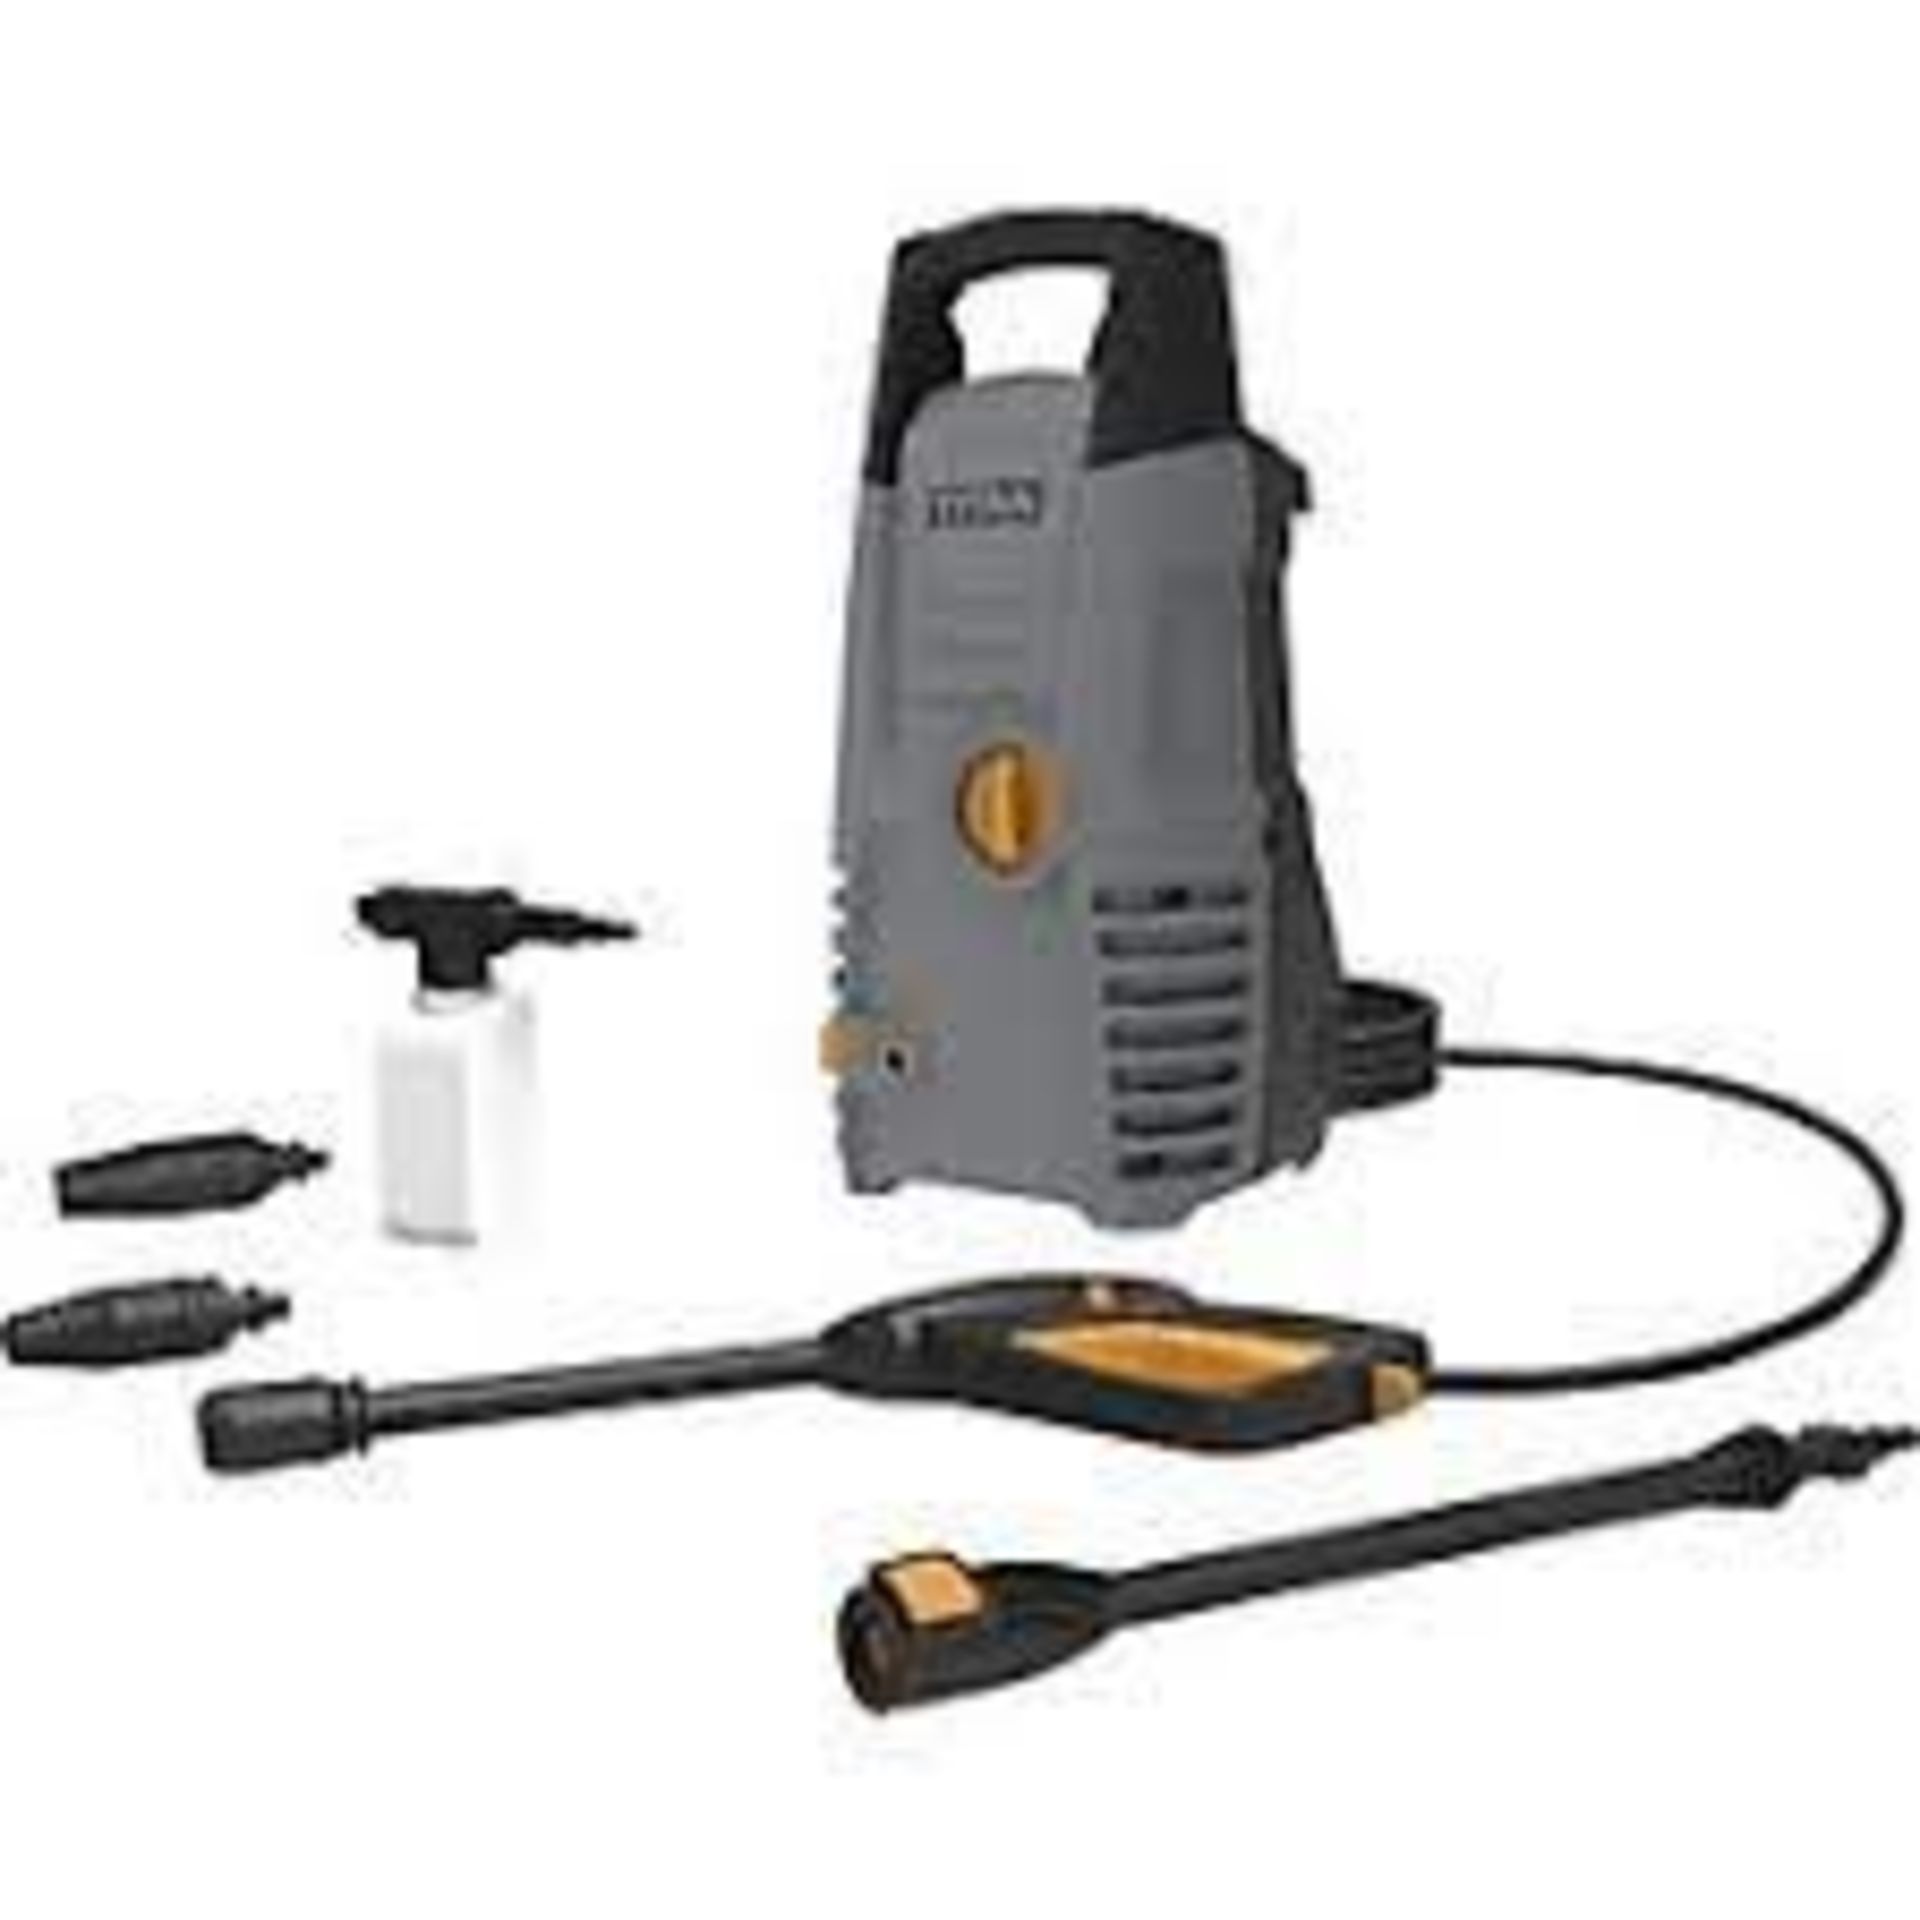 TITAN 100BAR ELECTRIC HIGH PRESSURE WASHER 1.3KW 230V. - R14.10. Compact design with space-saving